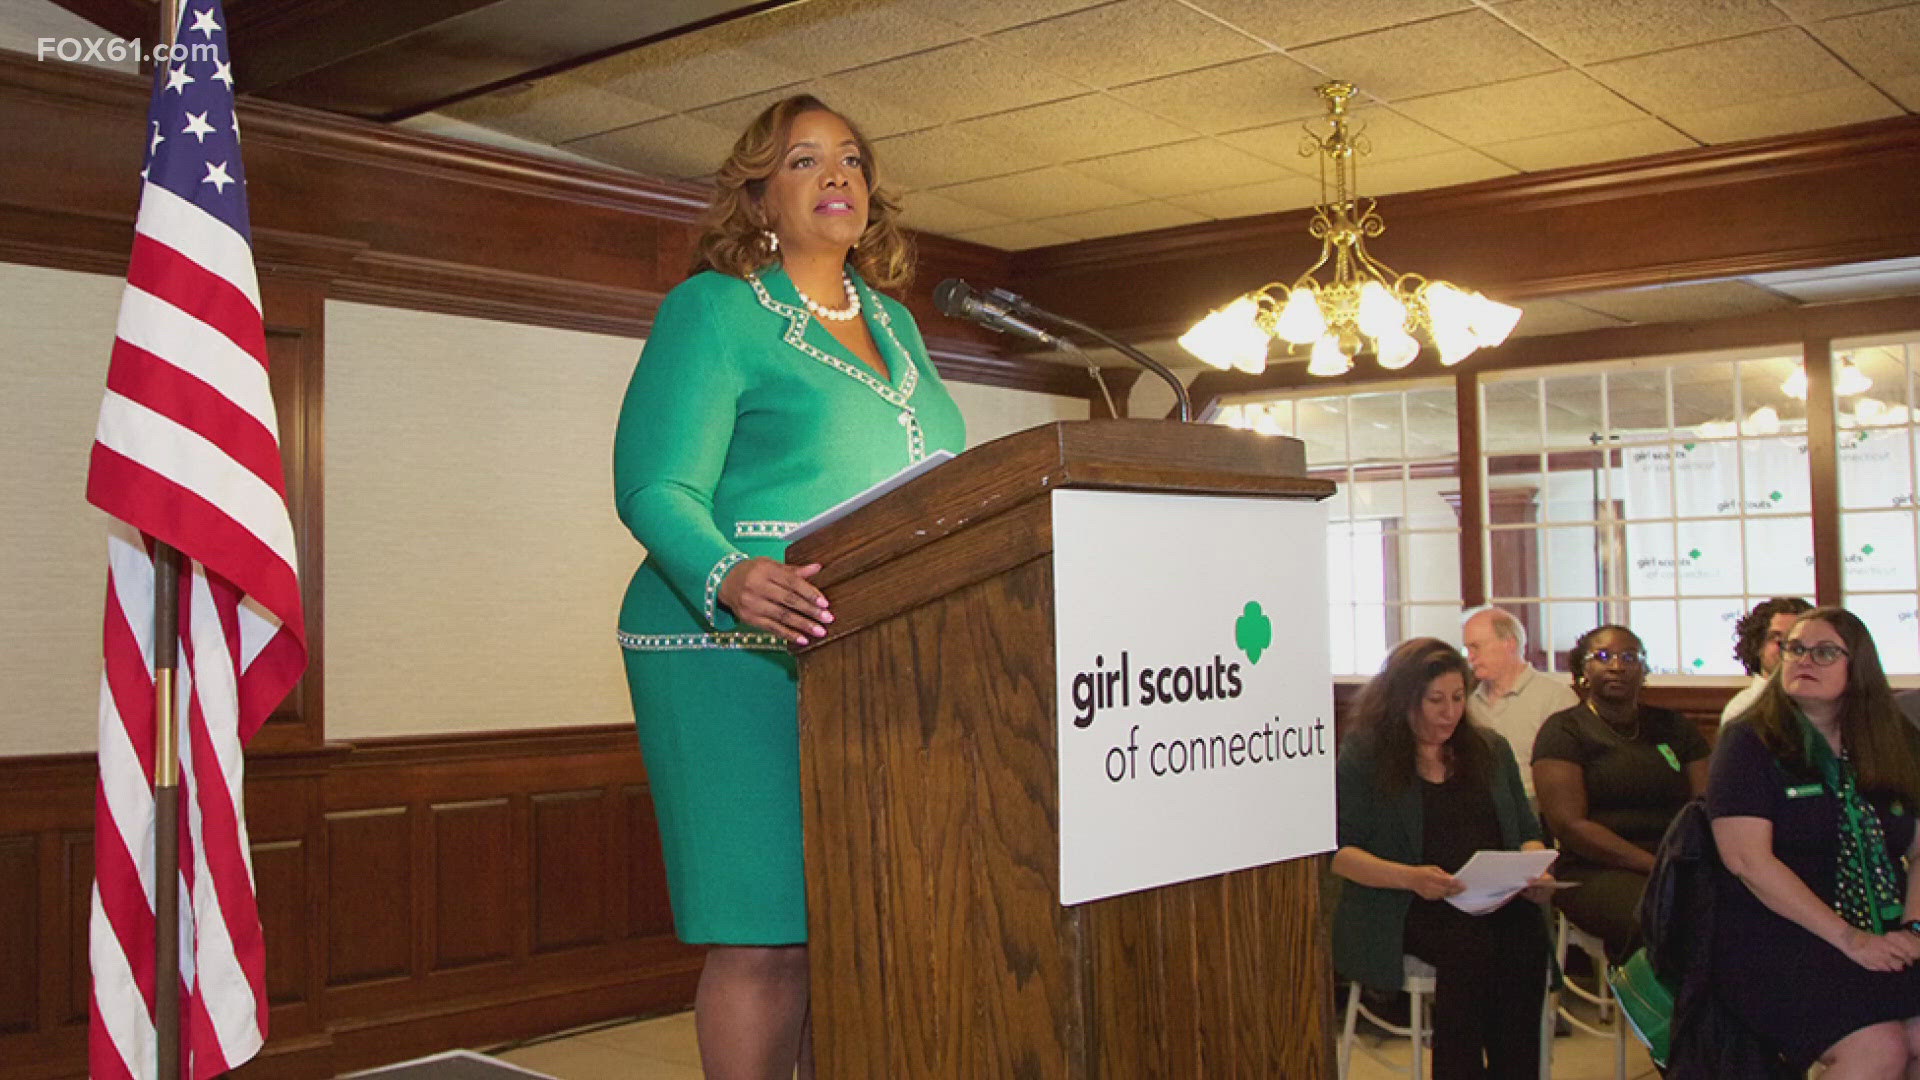 Attorney Elicia Pegues Spearman is now the head of the Girl Scouts of Connecticut, the organization that's been a cornerstone of girls' development for generations.